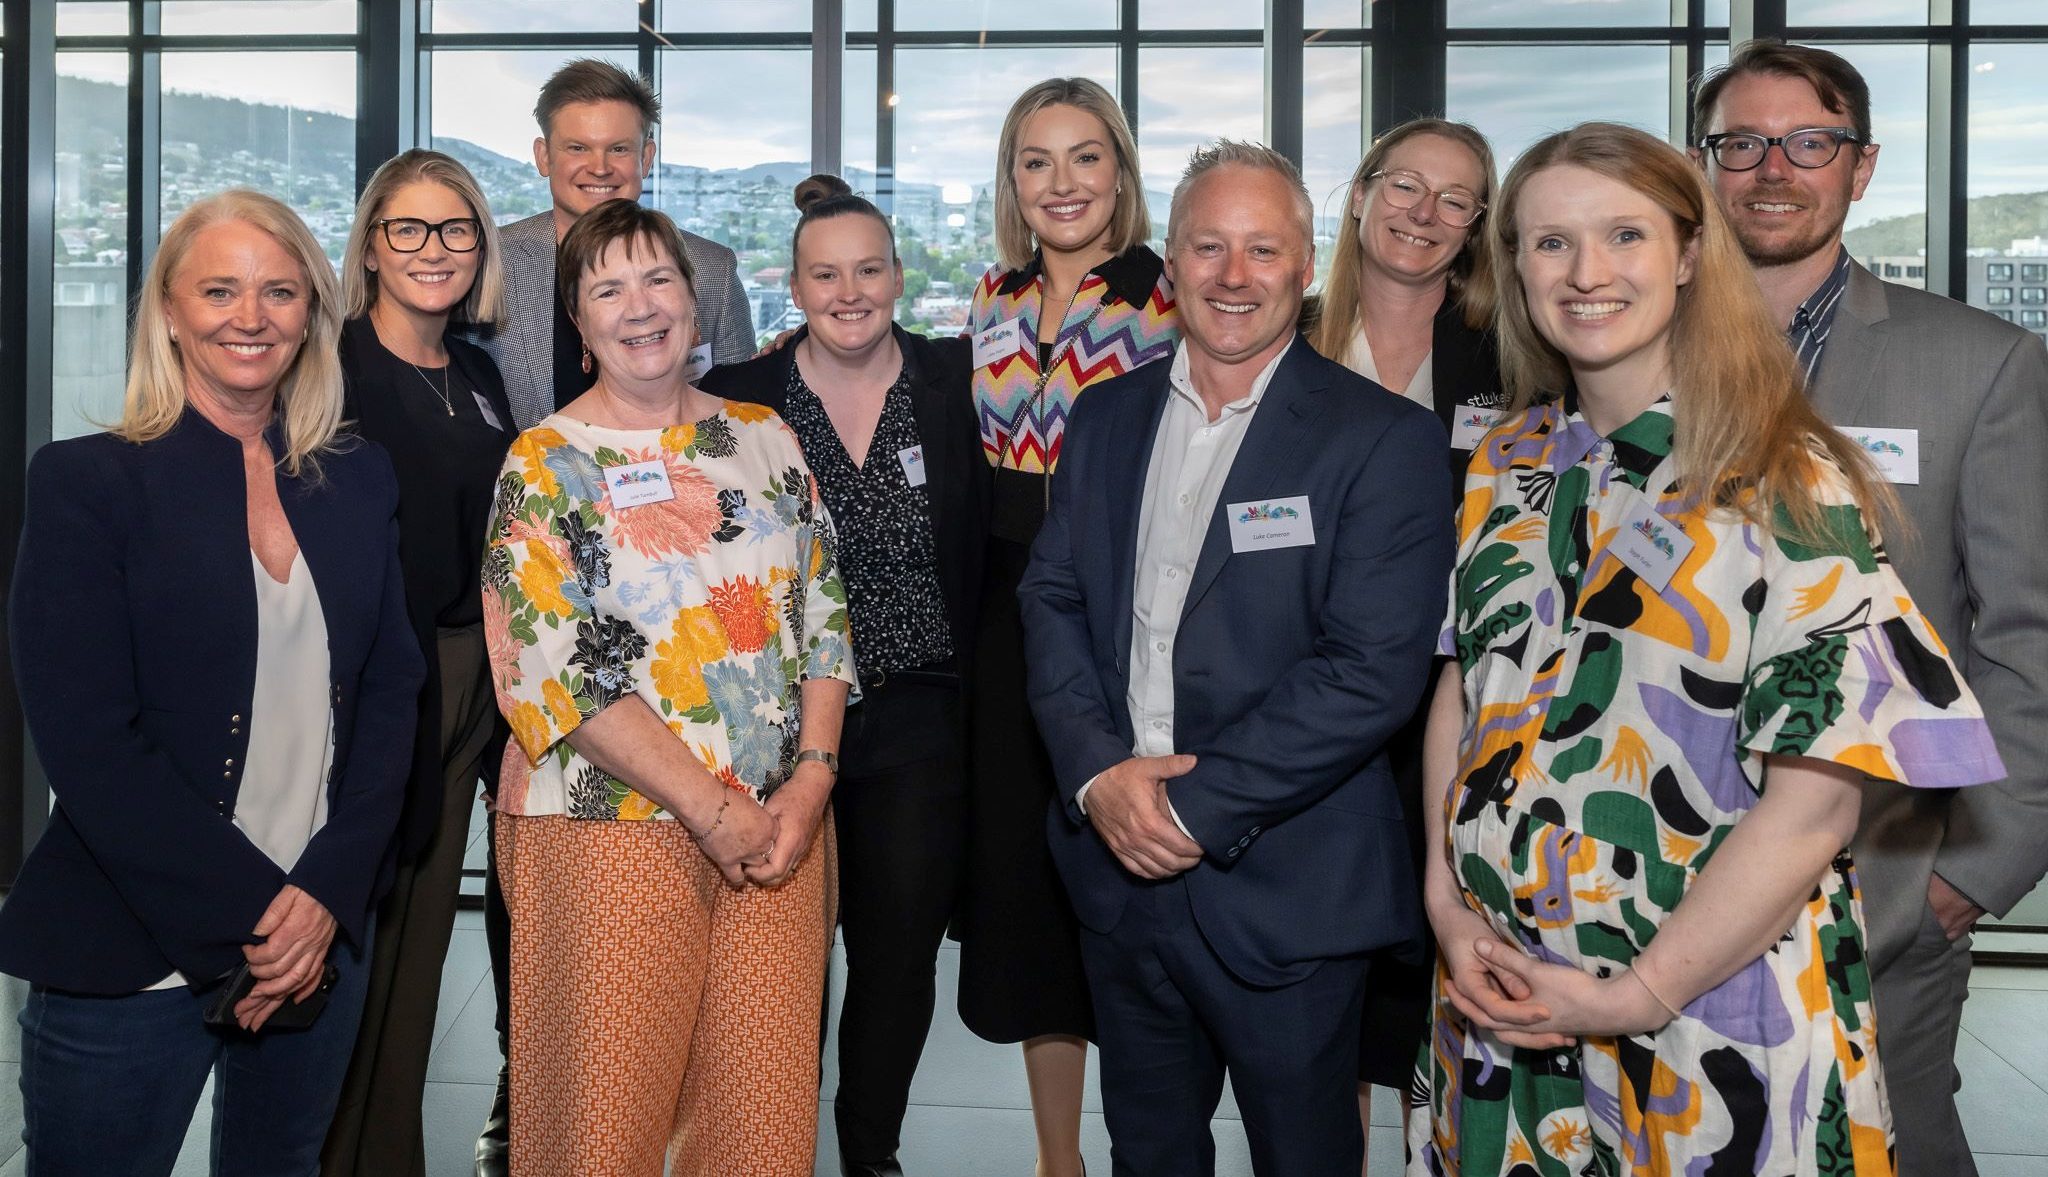 The Royal Hobart Hospital Research Foundation and St Lukes team